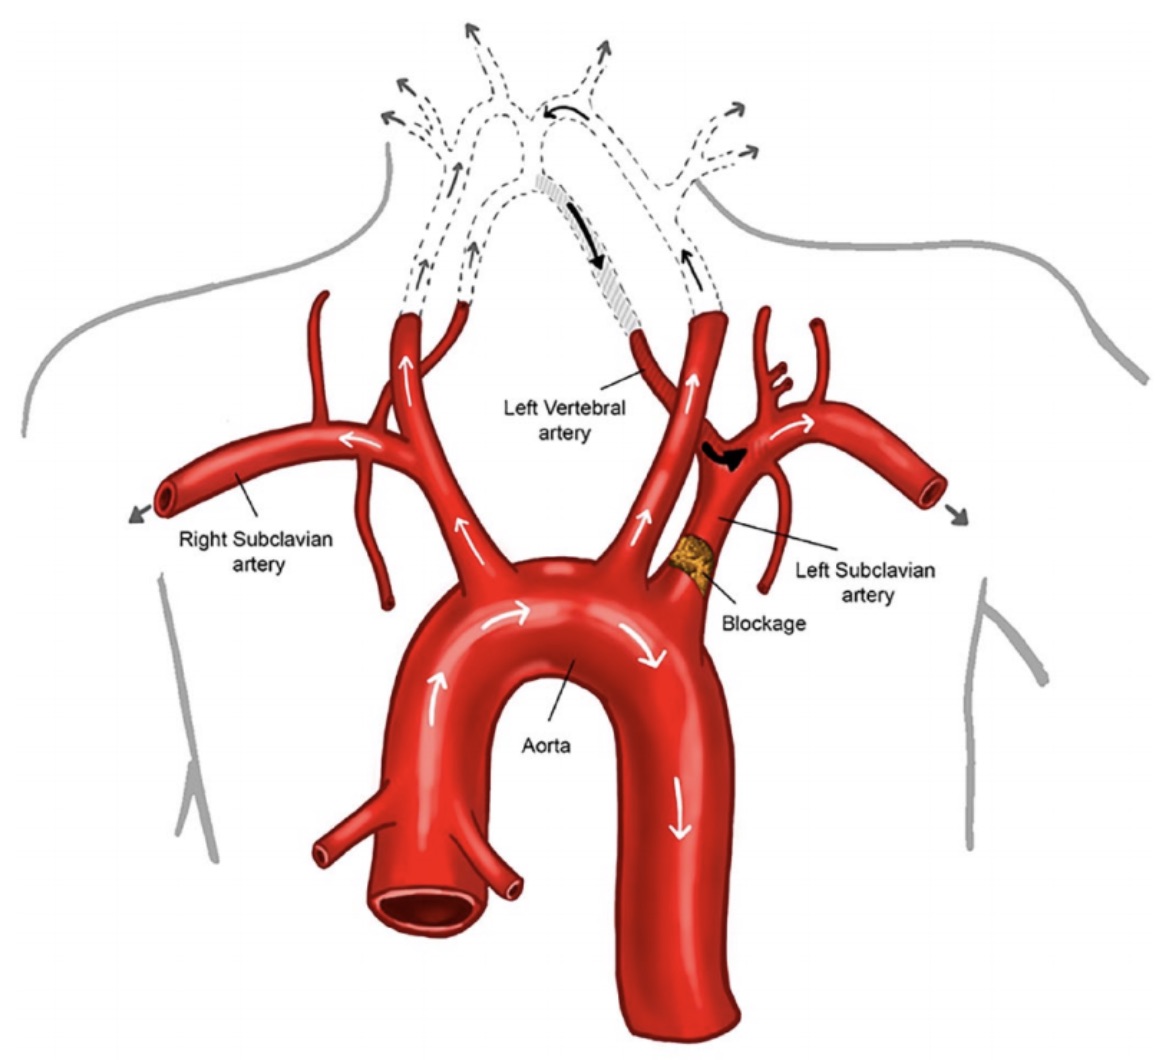 Subclavian artery stenosis. What do you need to know? Access our Vascular Medicine Patient Information Page, written by experts @shireen_khoury & @evratchford ow.ly/KQOk50FuBit #vascular #meded